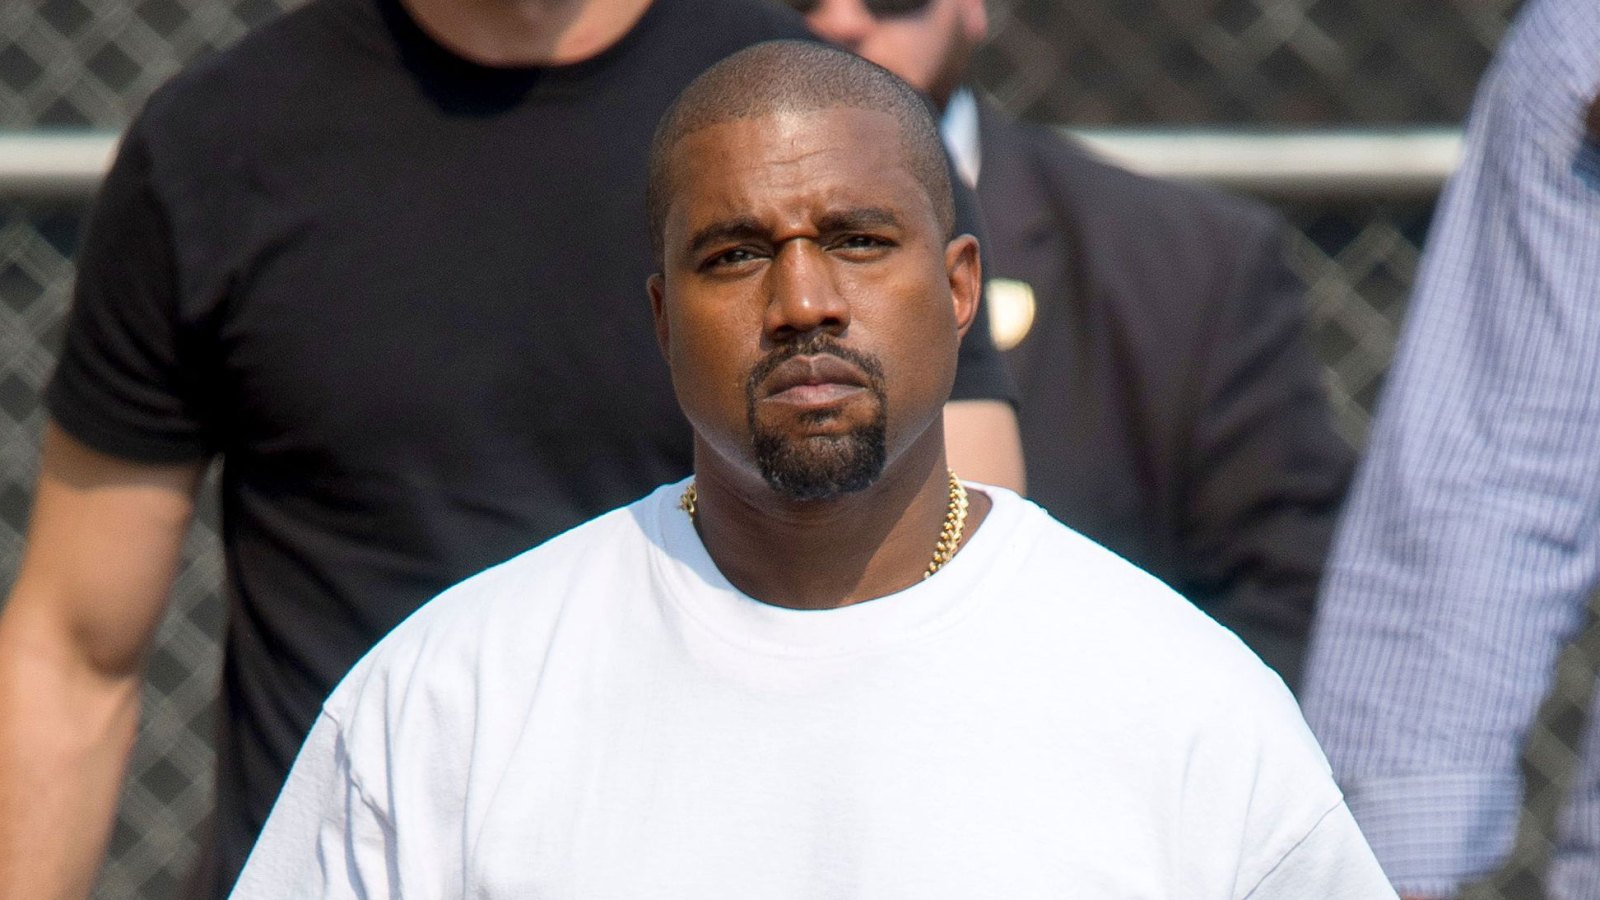 Kanye West's Yeezy Gap Clothes Are Being Sold in Trash Bags